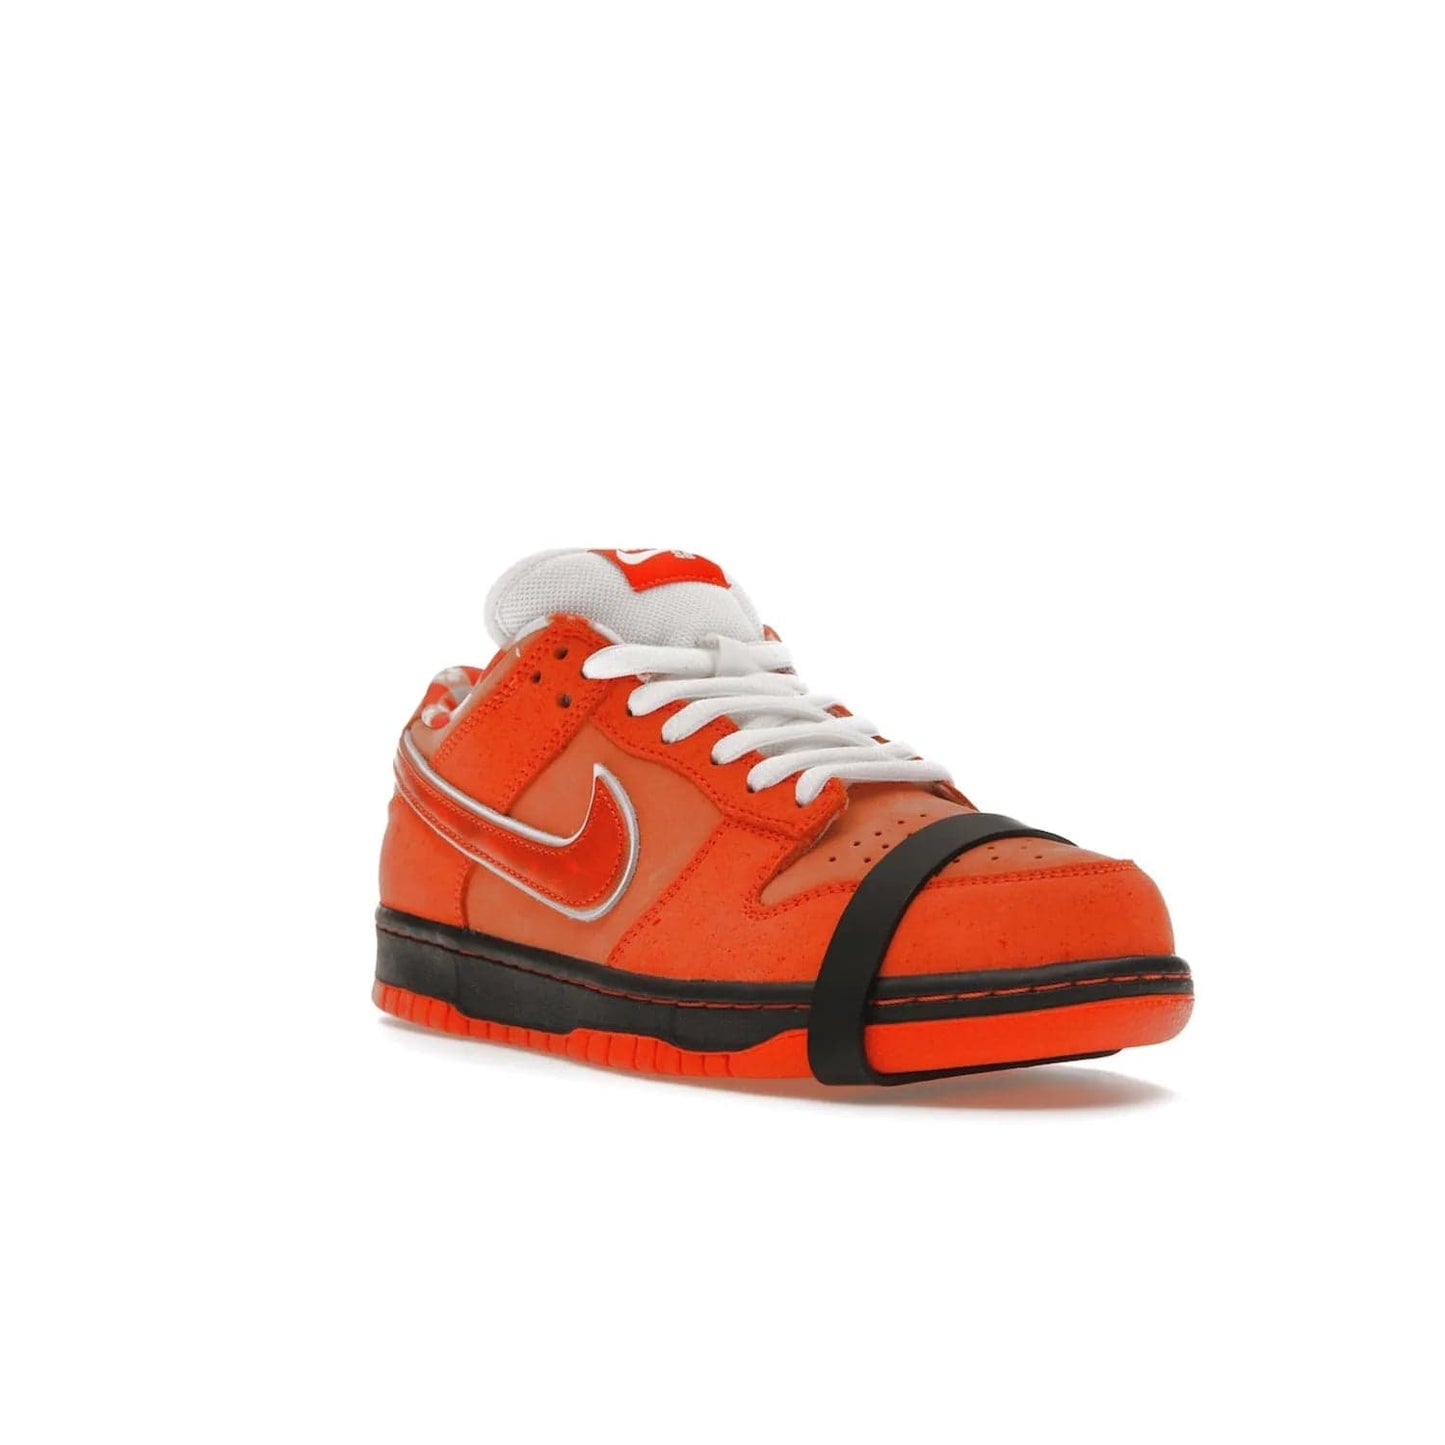 Nike SB Dunk Low Concepts Orange Lobster - Image 6 - Only at www.BallersClubKickz.com - Make a statement with the Nike SB Dunk Low Concepts Orange Lobster. Variety of orange hues, nubuck upper, bib-inspired lining & rubber outsole create bold look & comfortable blend of style. Available December 20th, 2022.